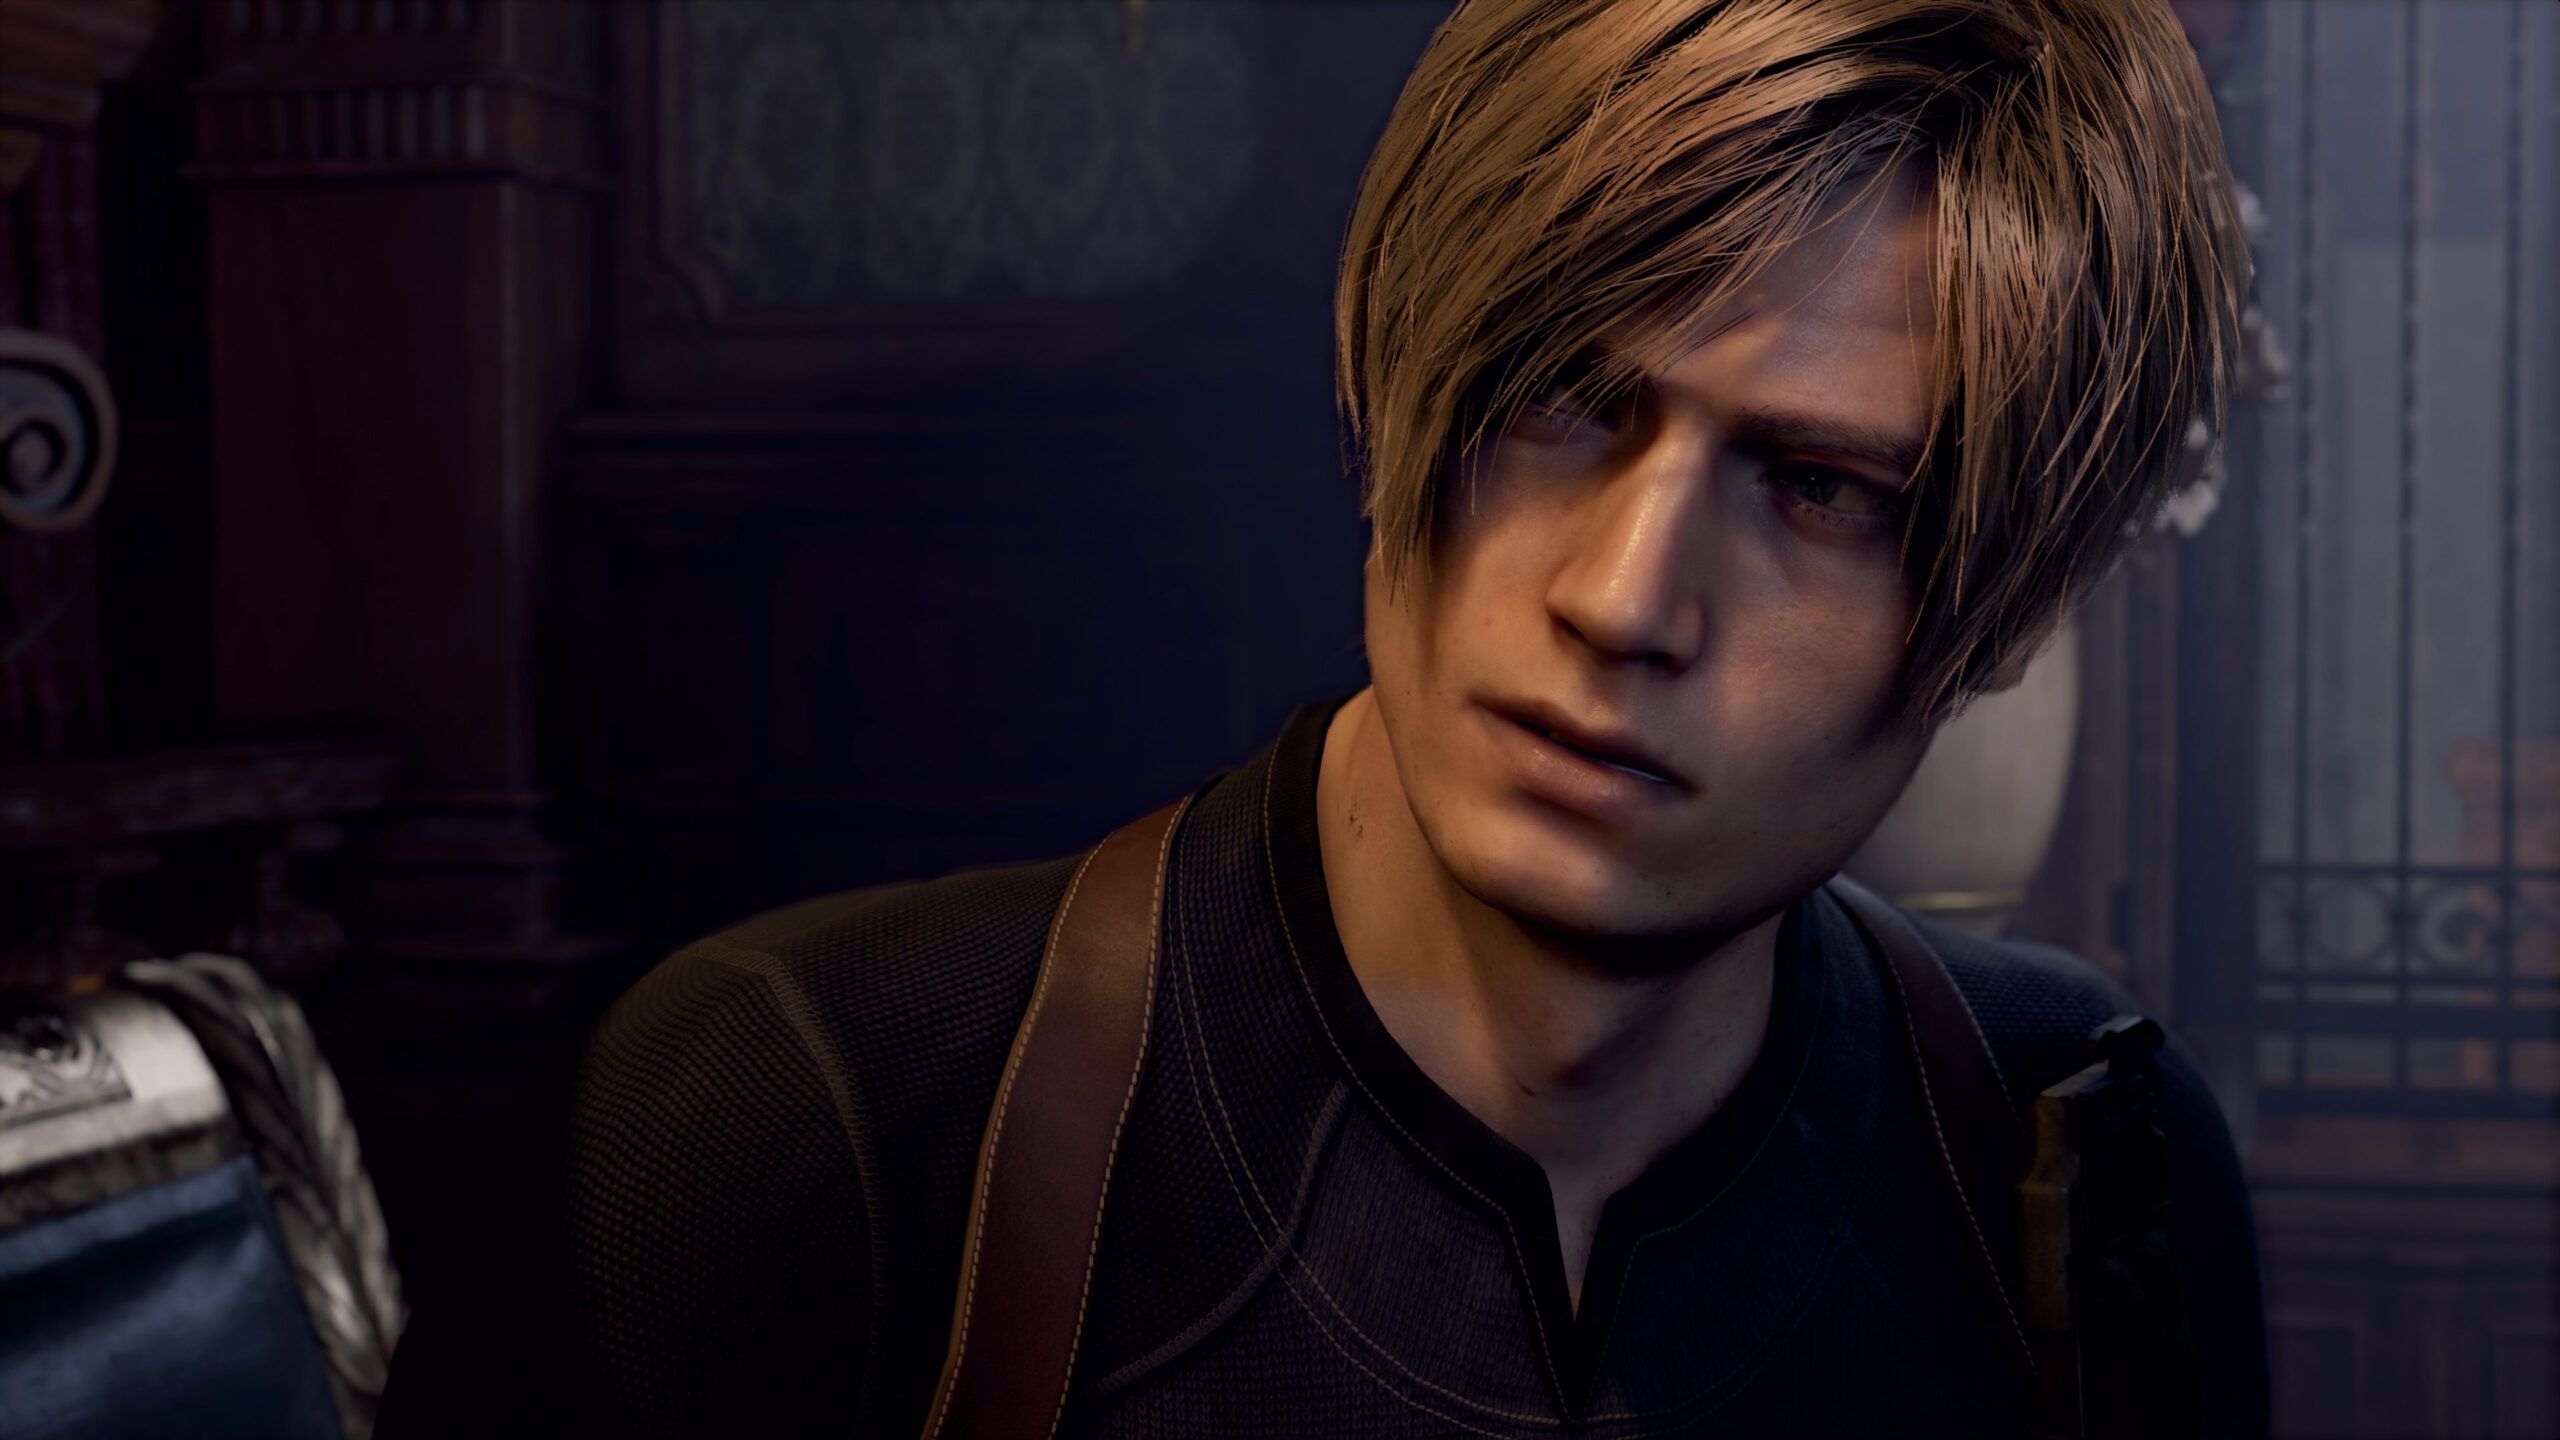 Resident Evil 4 DLC Separate Ways announced at Sony's State of